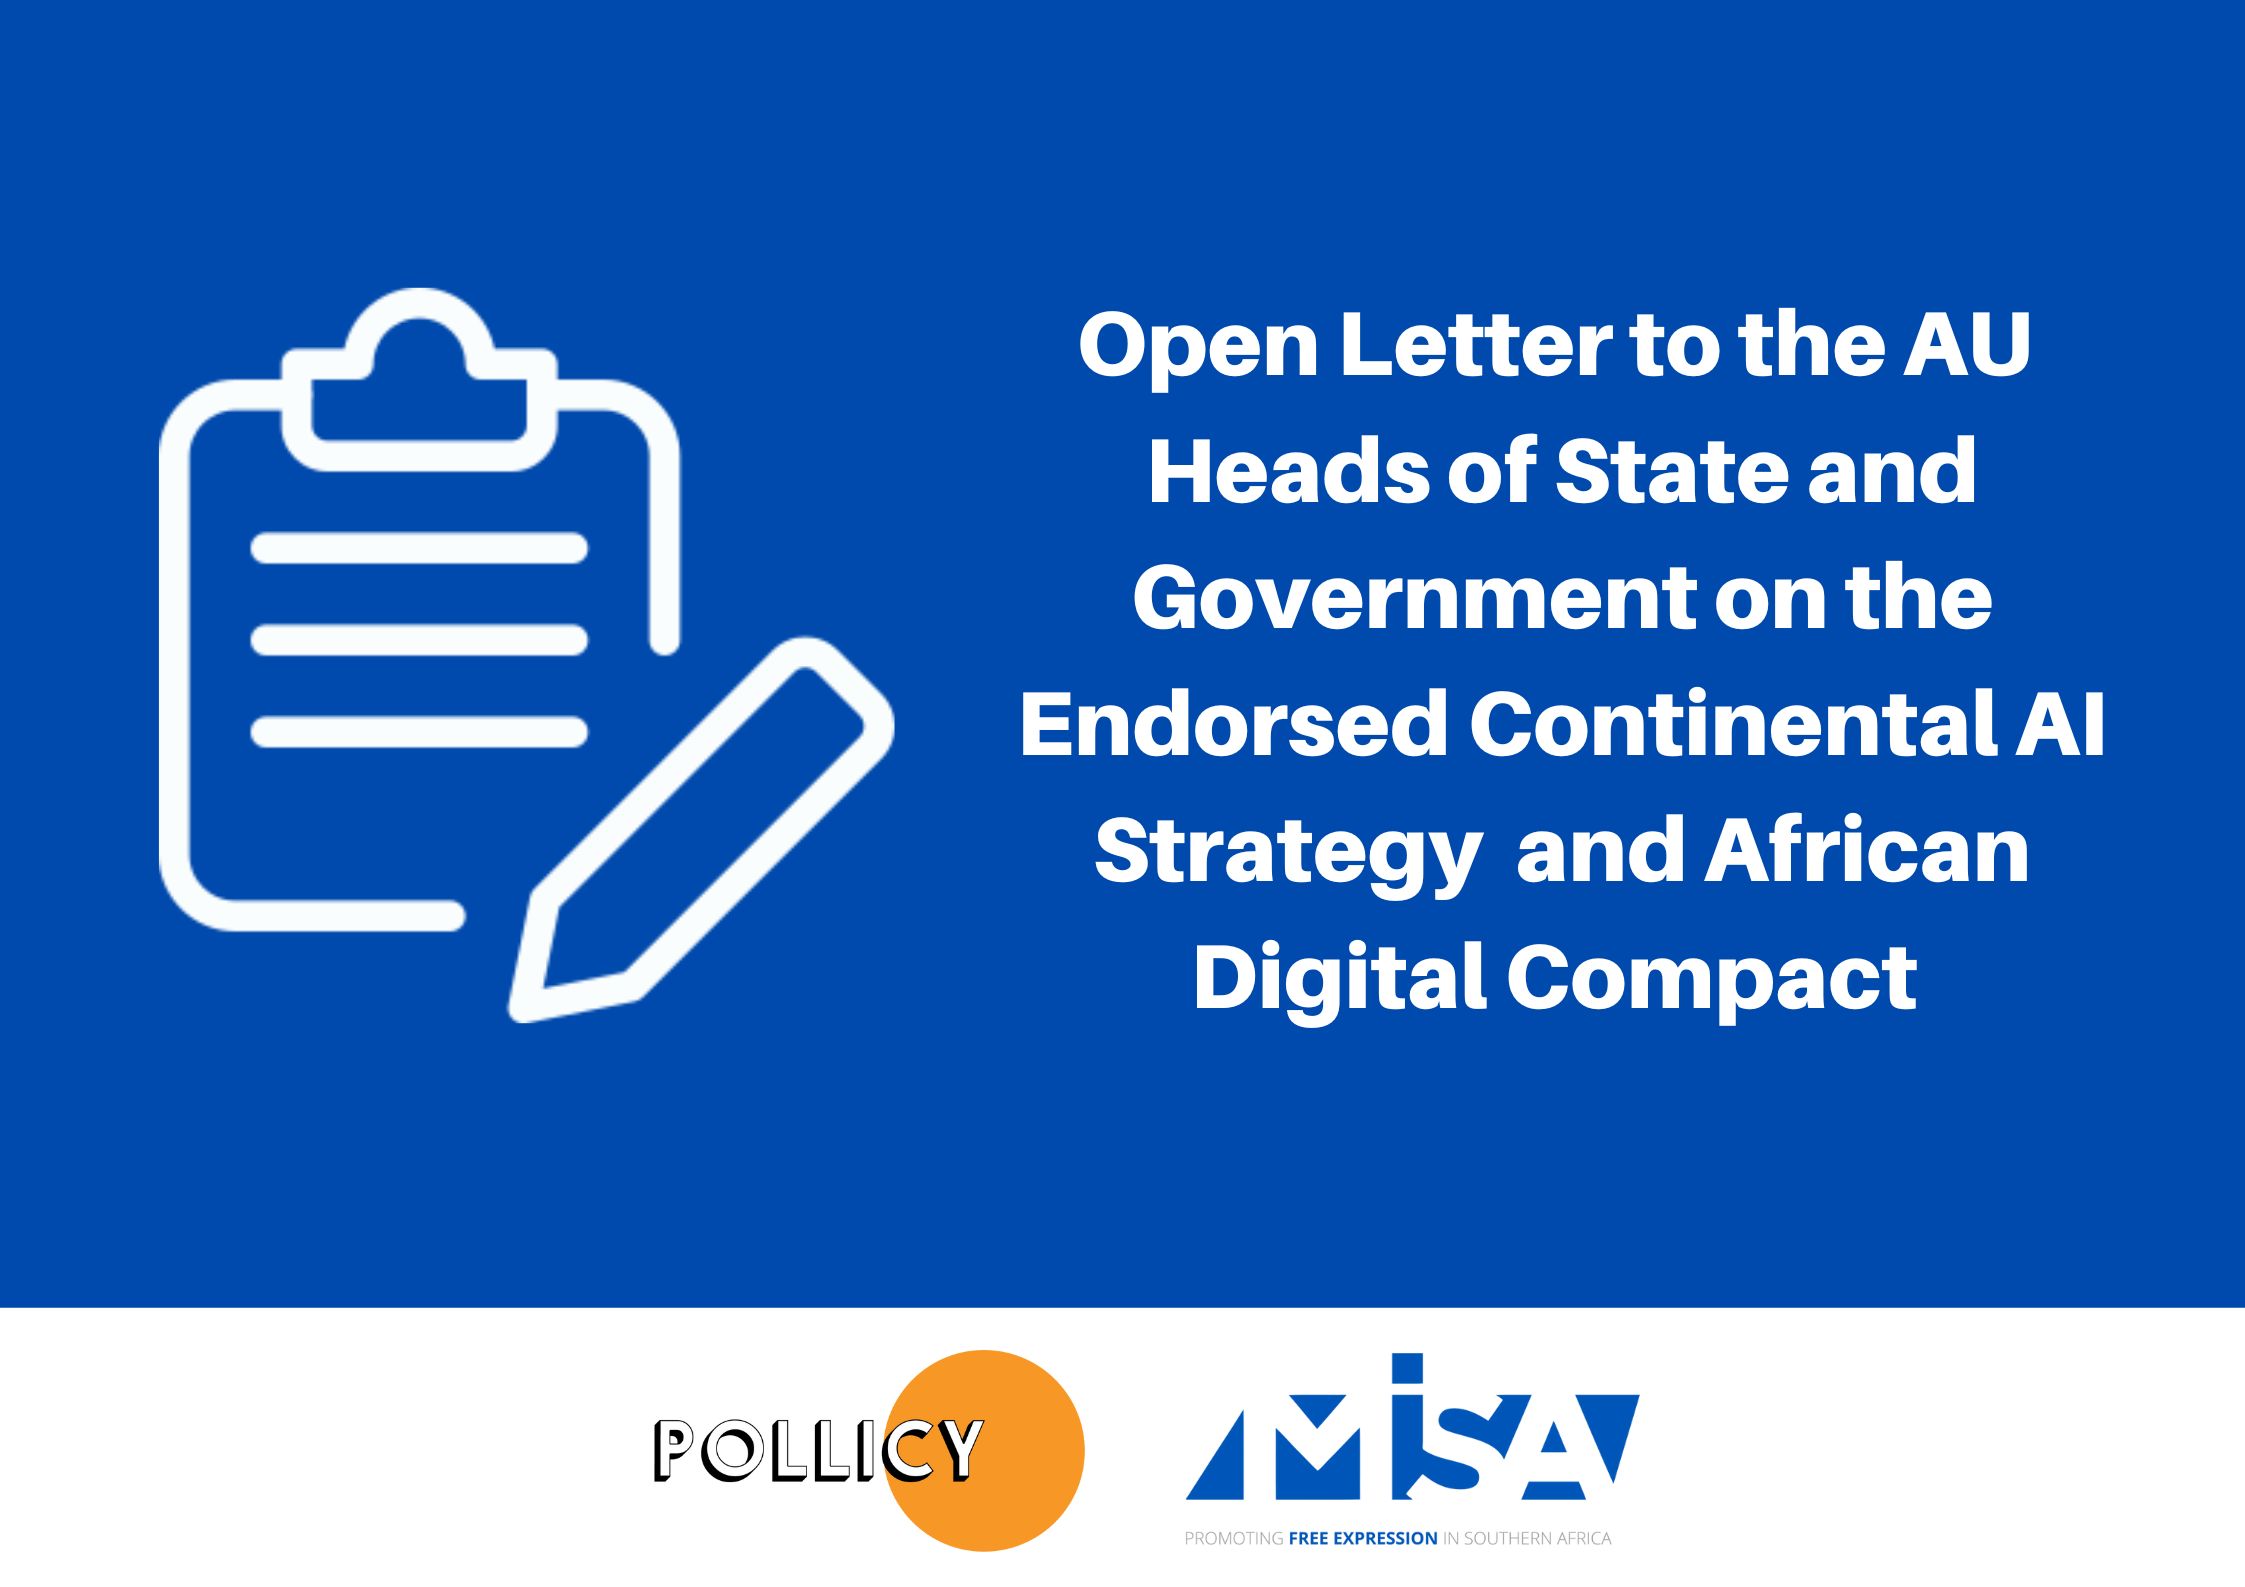 Open Letter to the AU Heads of State and Government on the Endorsed Continental AI Strategy  and African Digital Compact